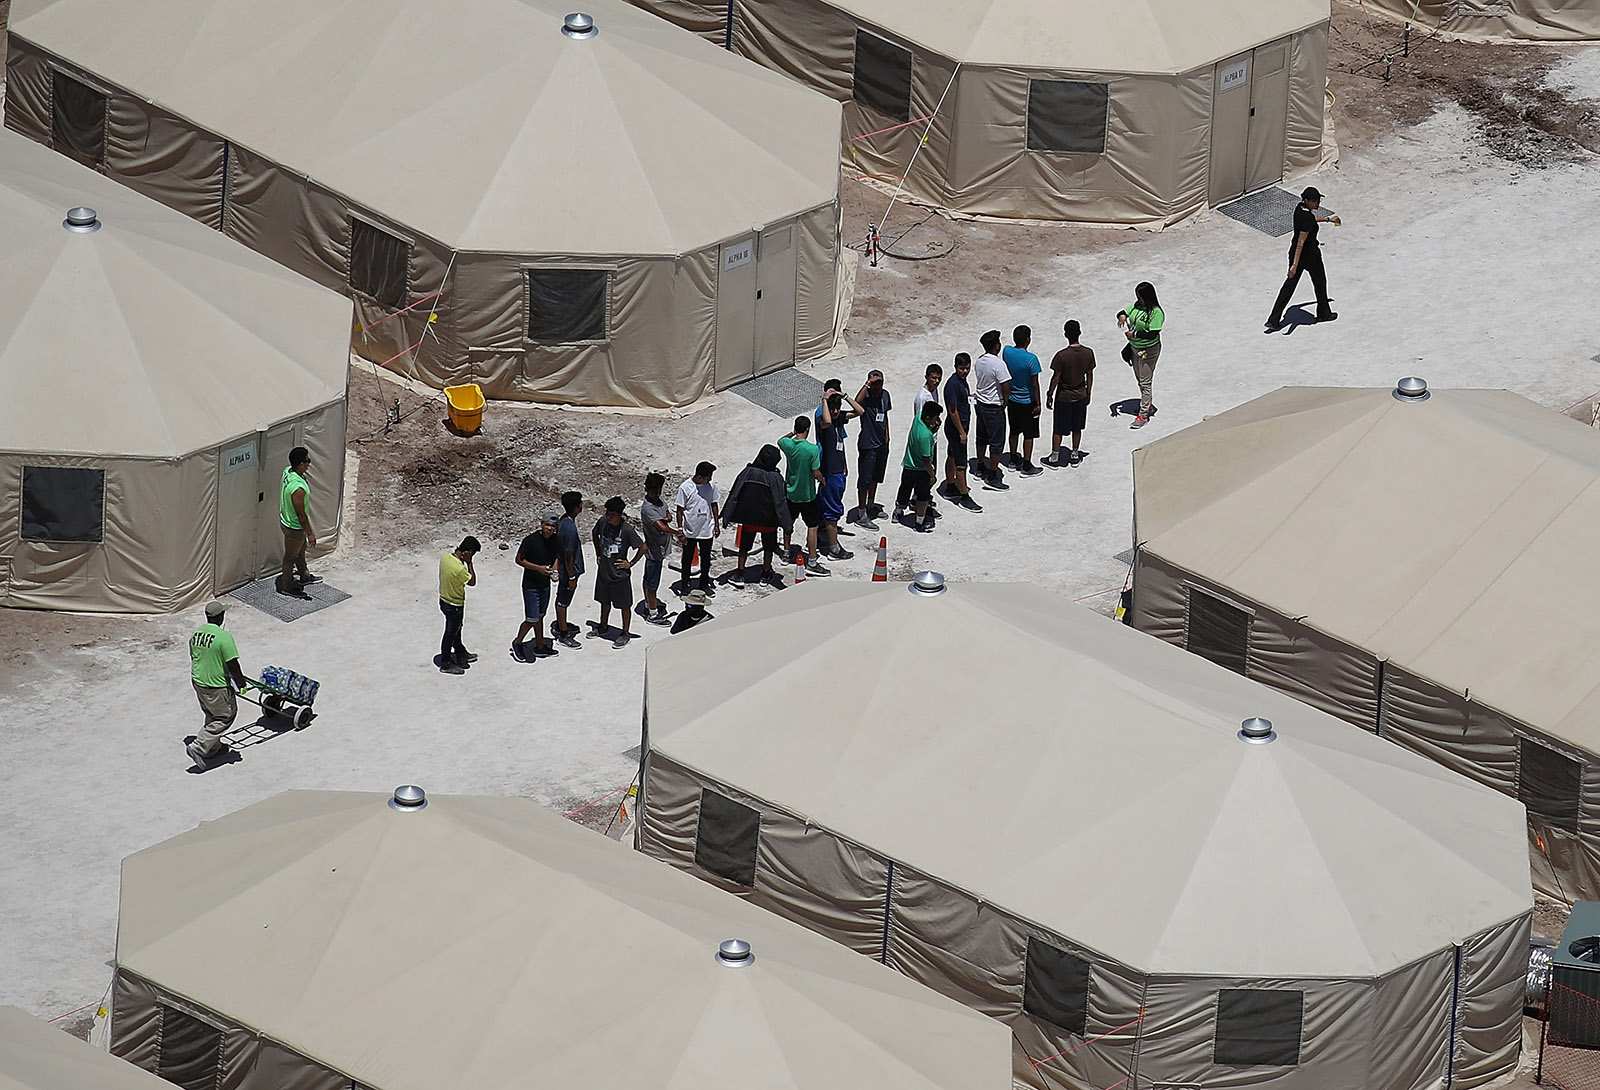 Children and staff at the Trump administration’s tent facility for detaining migrant children separated from their parents, Tornillo, Texas, June 19, 2018